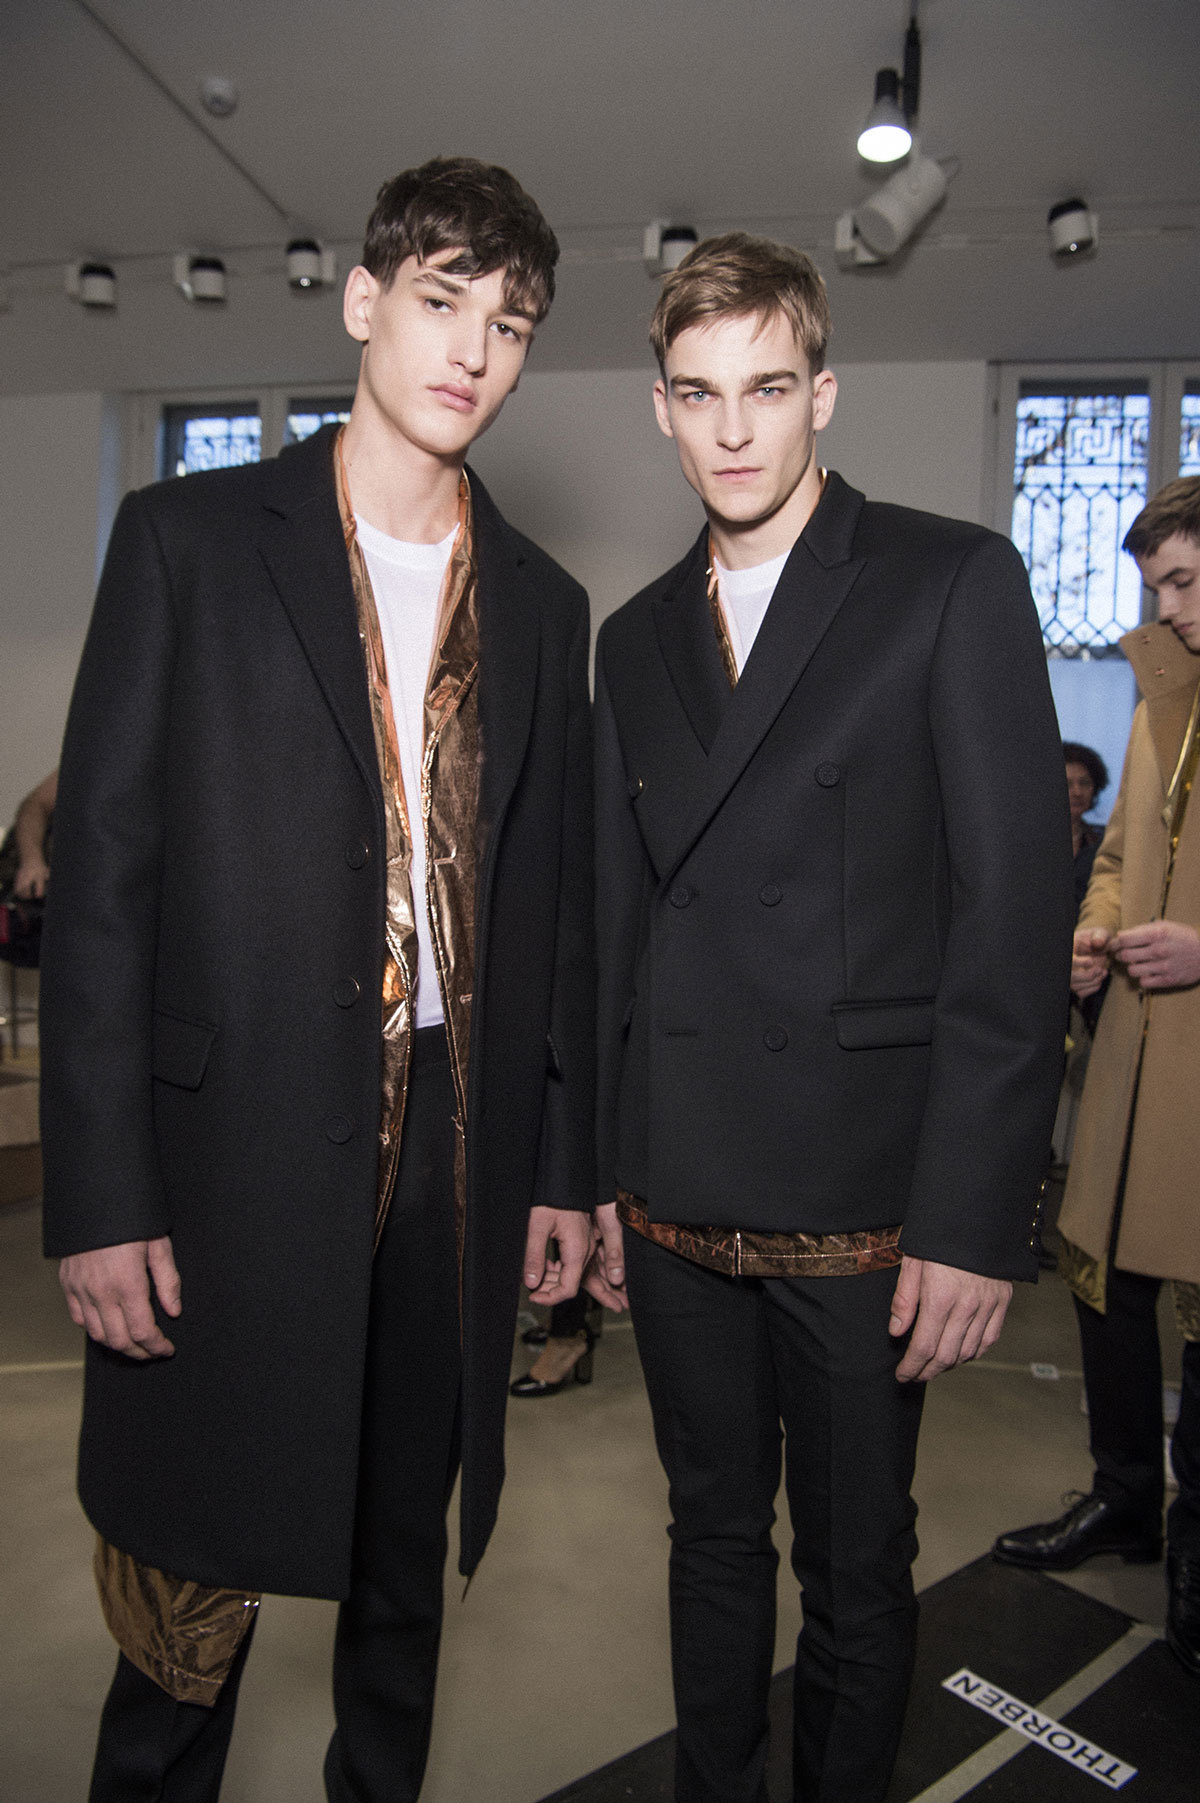 all that glimmers is gold at calvin klein fall/winter 16 - i-D